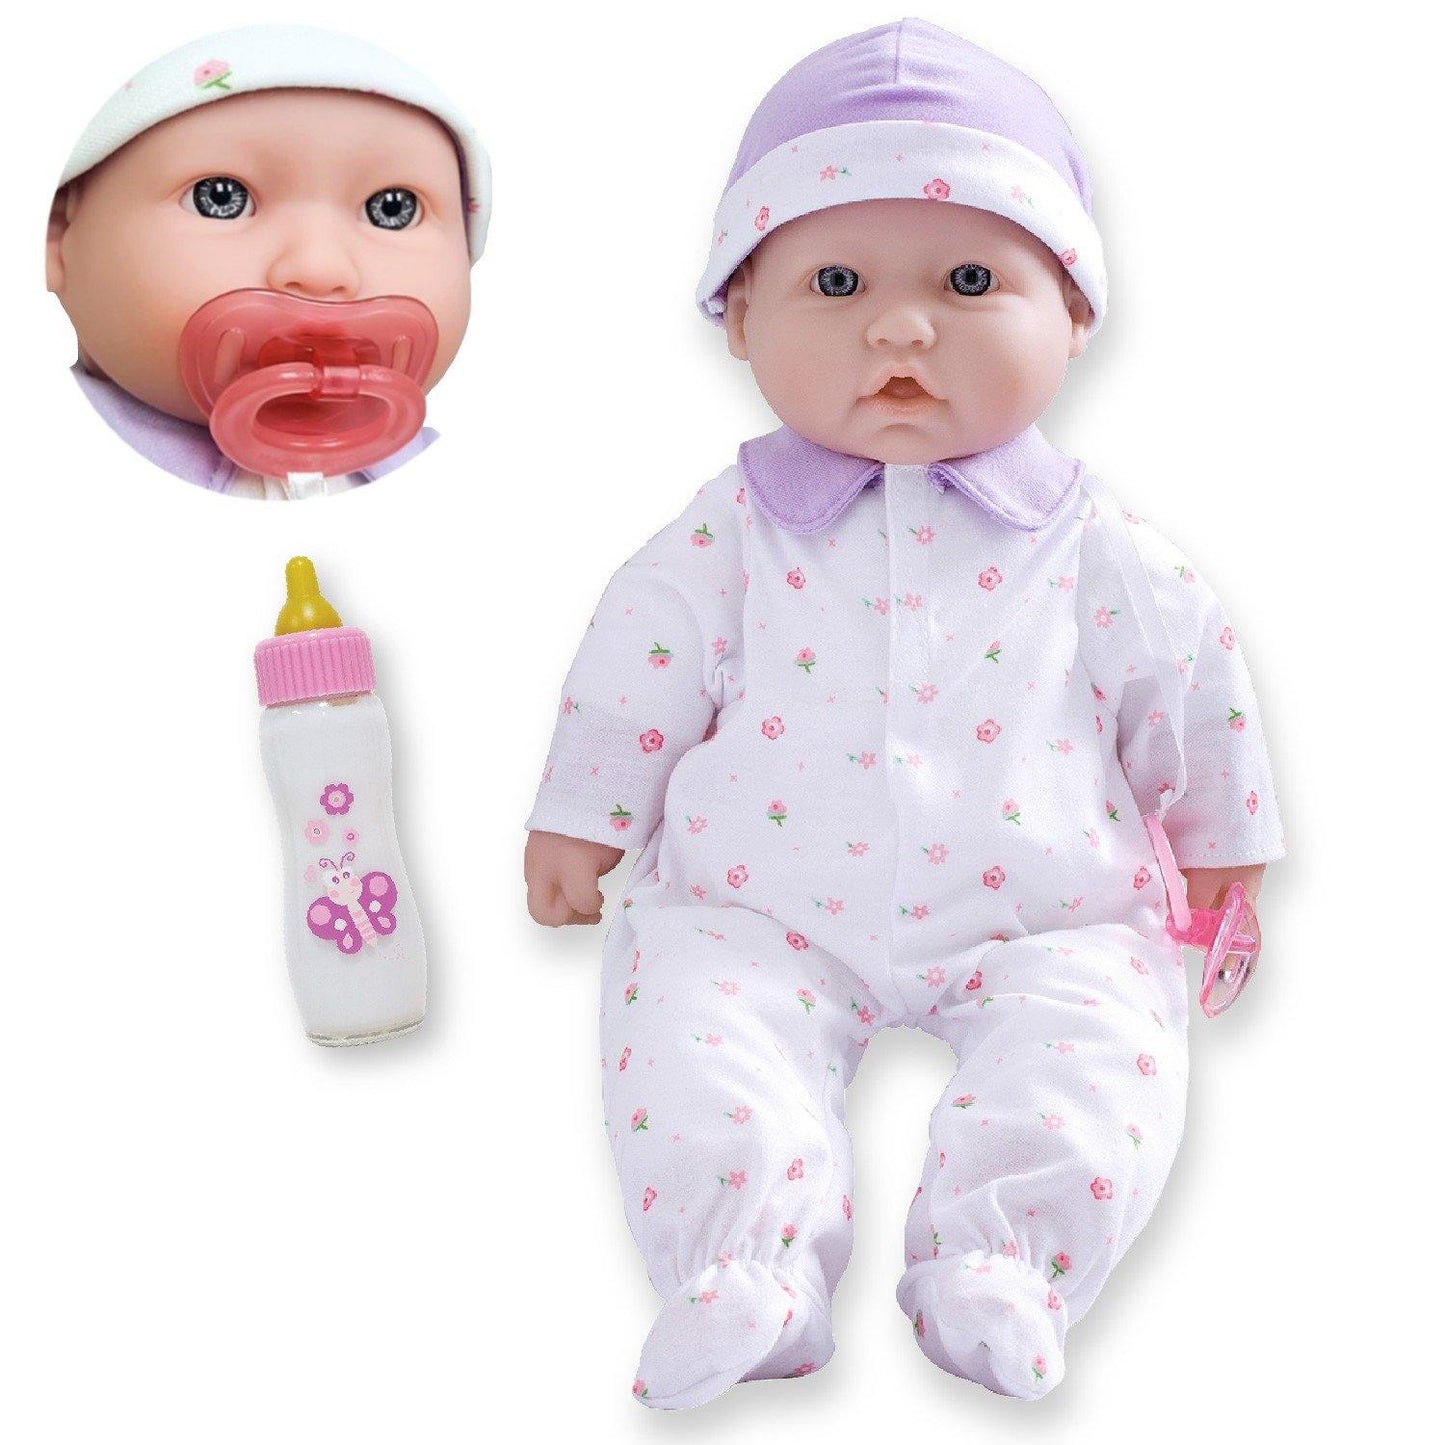 JC Toys, La Baby 16 inches Soft Body Baby Doll in Purple - Realistic Features - JC Toys Group Inc.